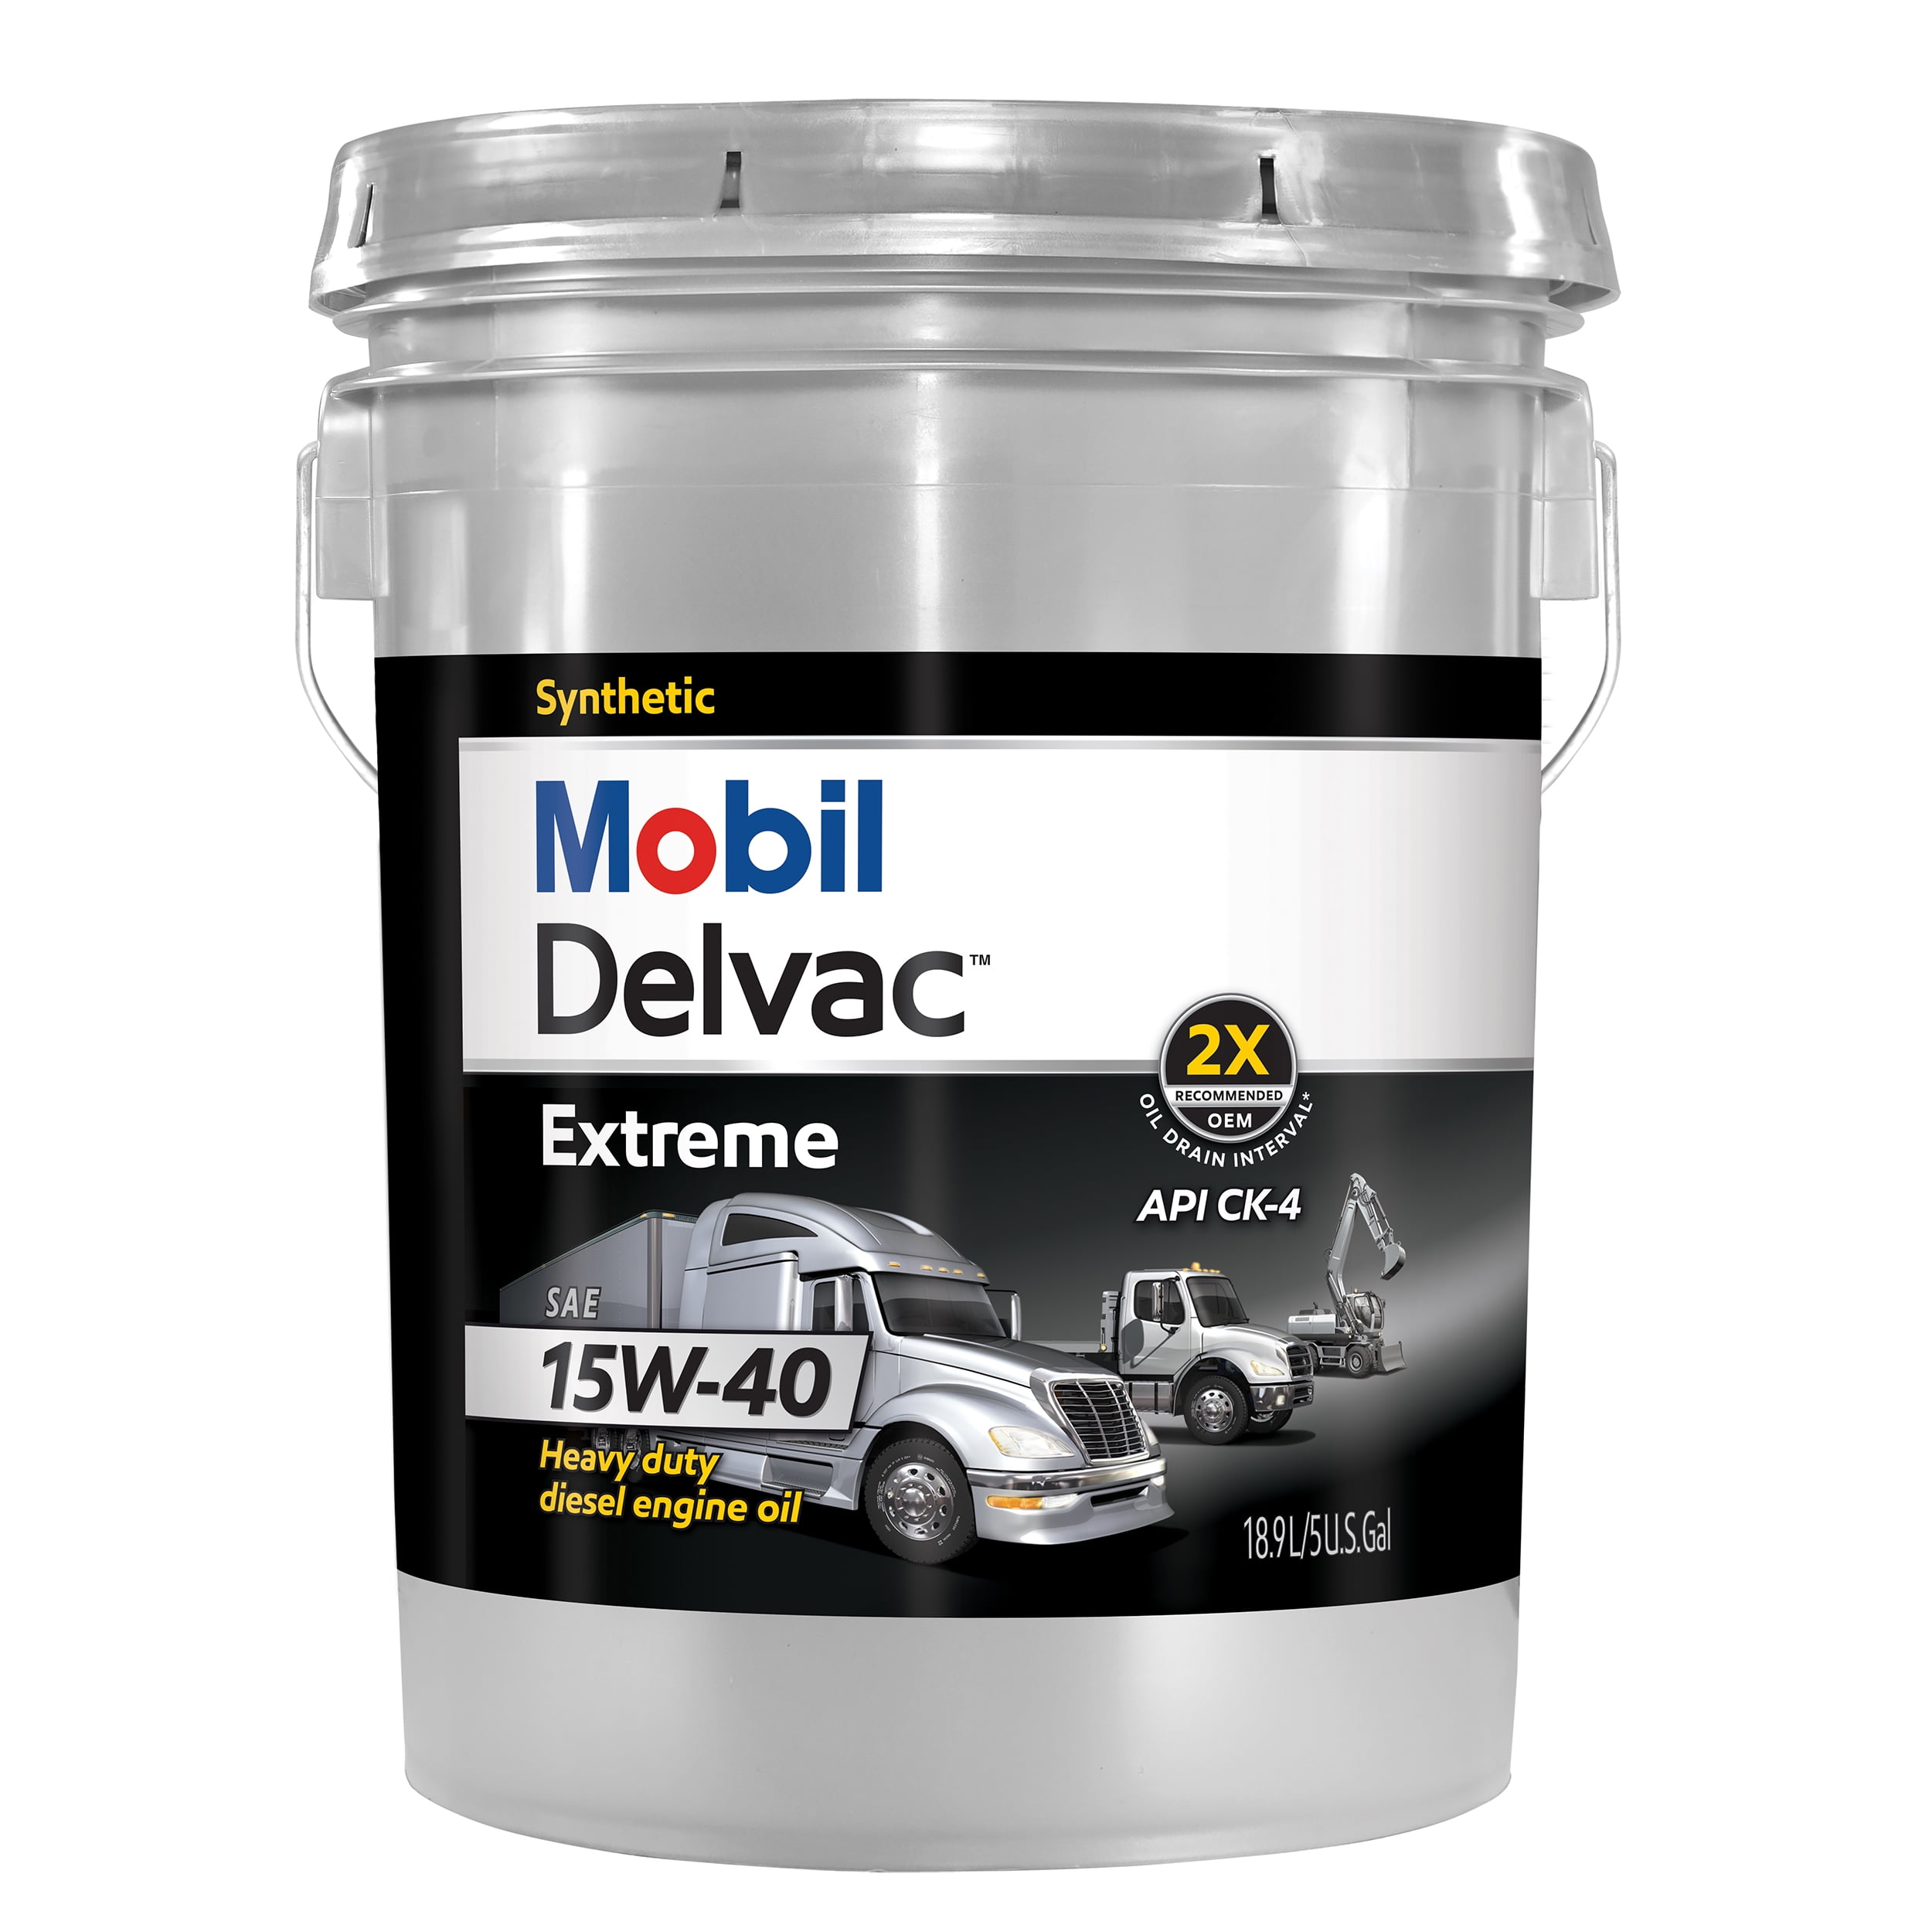 mobil-delvac-extreme-heavy-duty-full-synthetic-diesel-engine-oil-15w-40